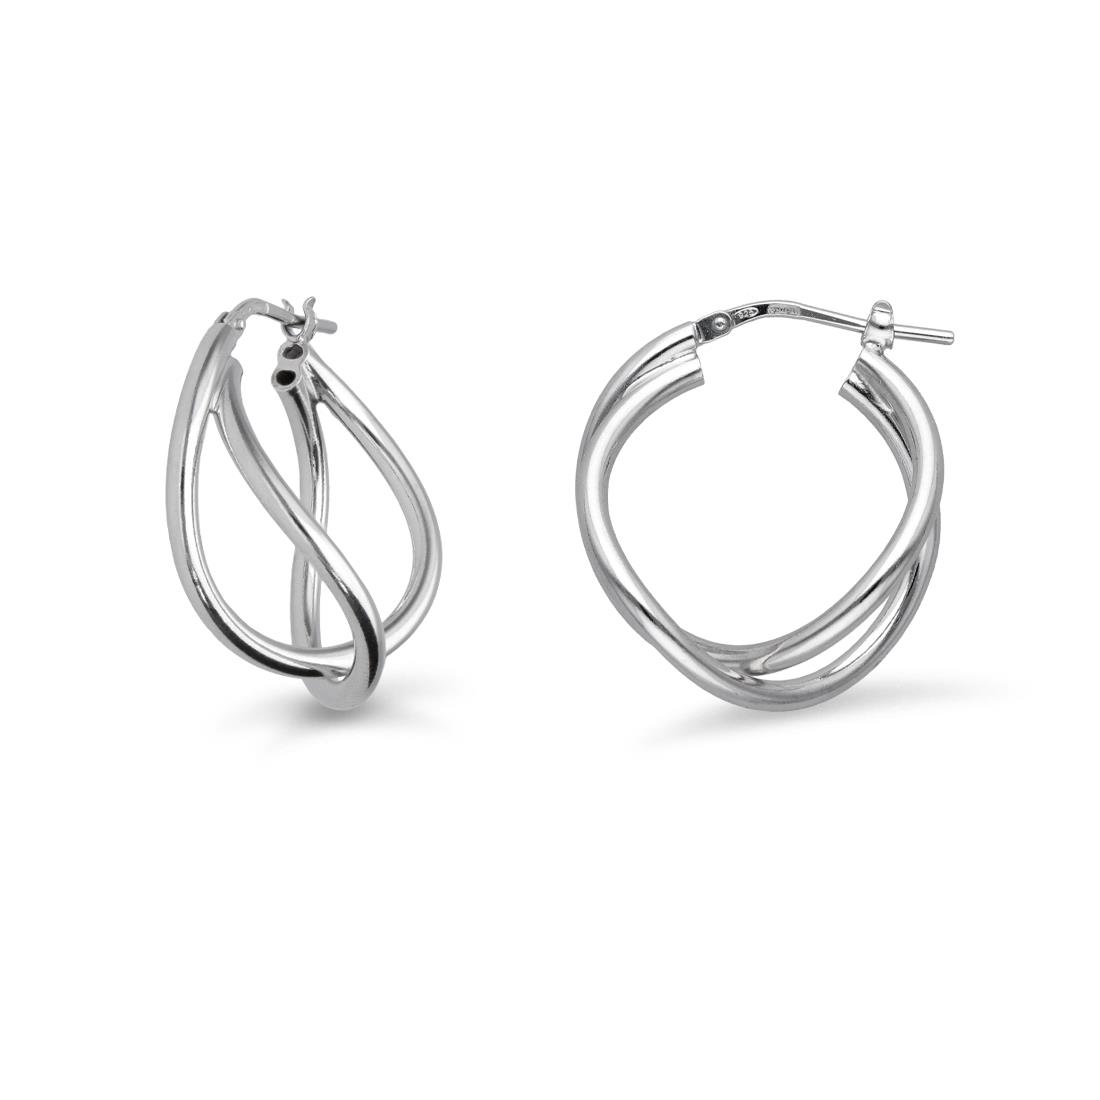 Double intertwined hoop earrings Hula Hoop collection in rhodium-plated 925 silver - LUXURY MILANO